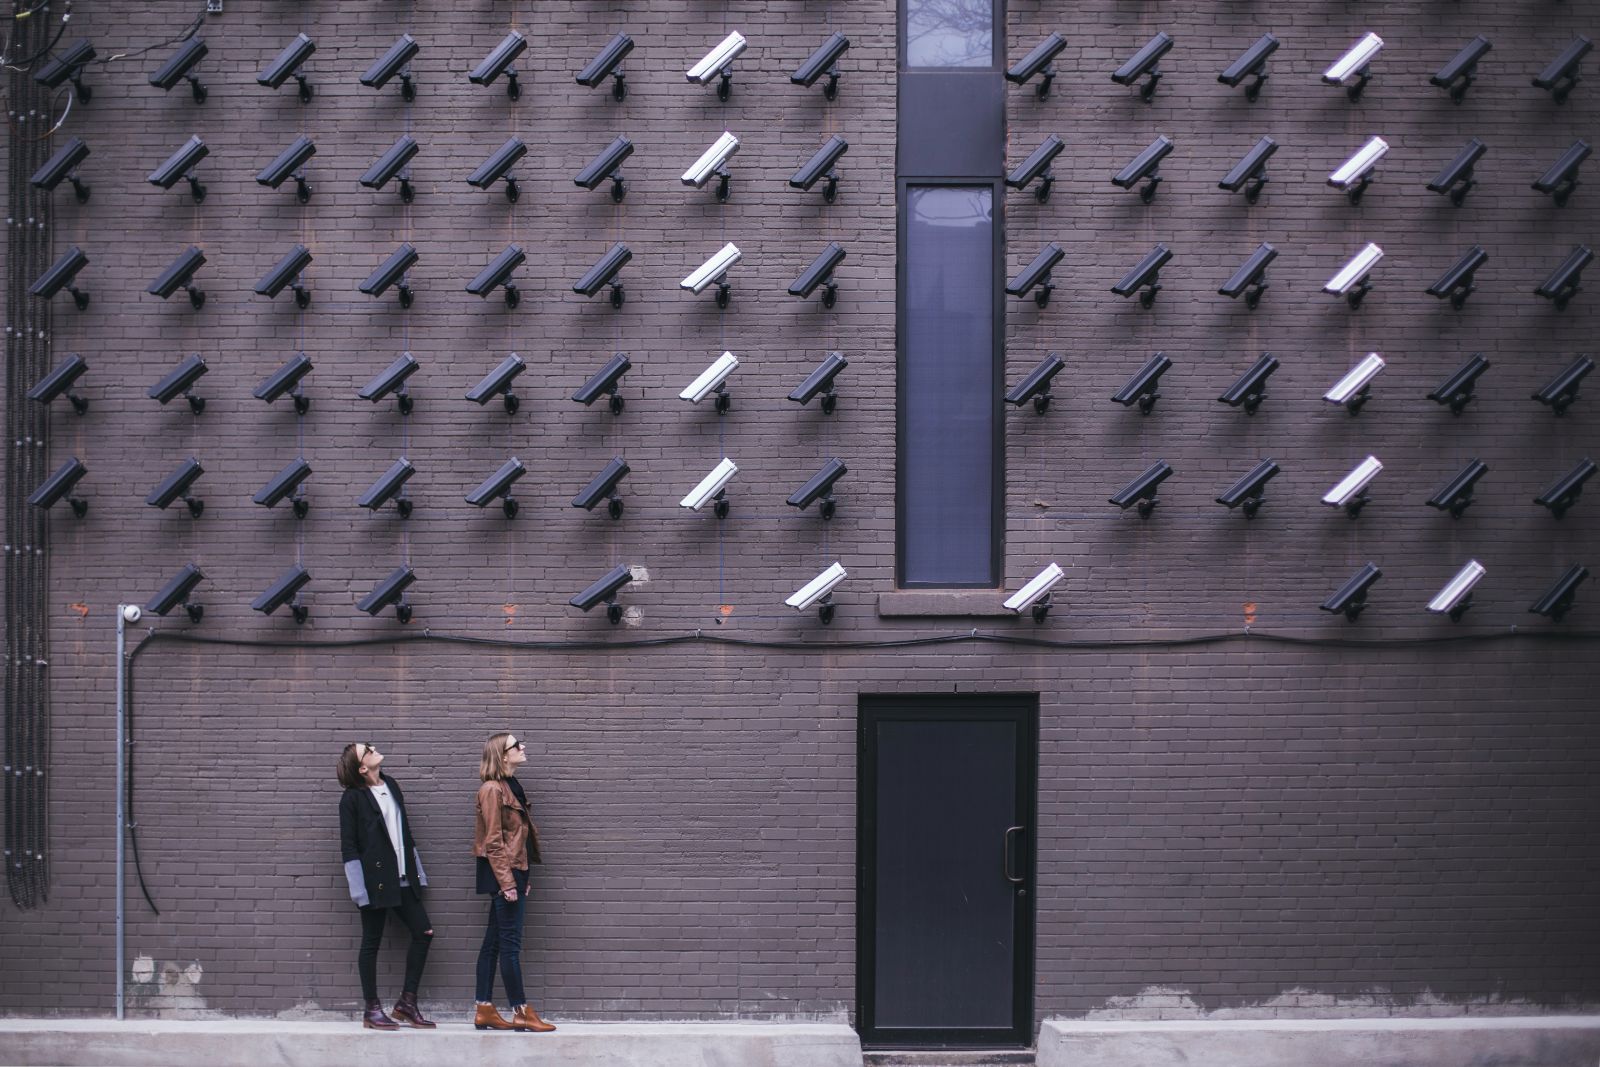 Two people looking up at a wall of dozens of security cameras facing them.